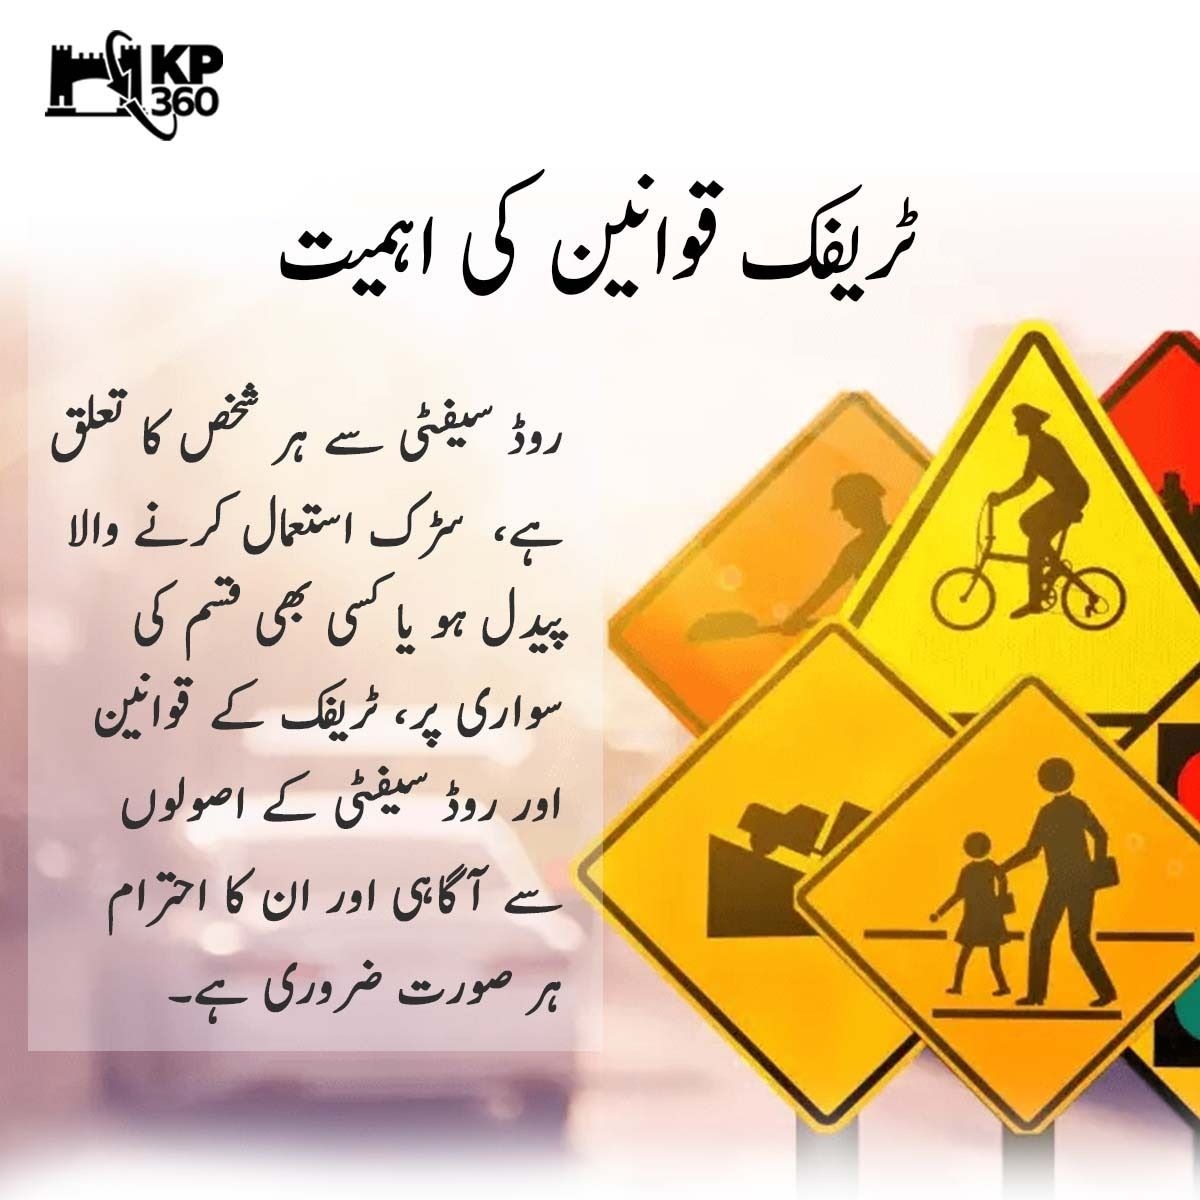 Importance of traffic rules.
 
 Many accidents can be avoided with a little caution, follow traffic rules to save yourself and others from an unfortunate incident.
  #ObeyTrafficRules #FollowTrafficRules
#WhatsApp
#TurkeySyriaEarthquake